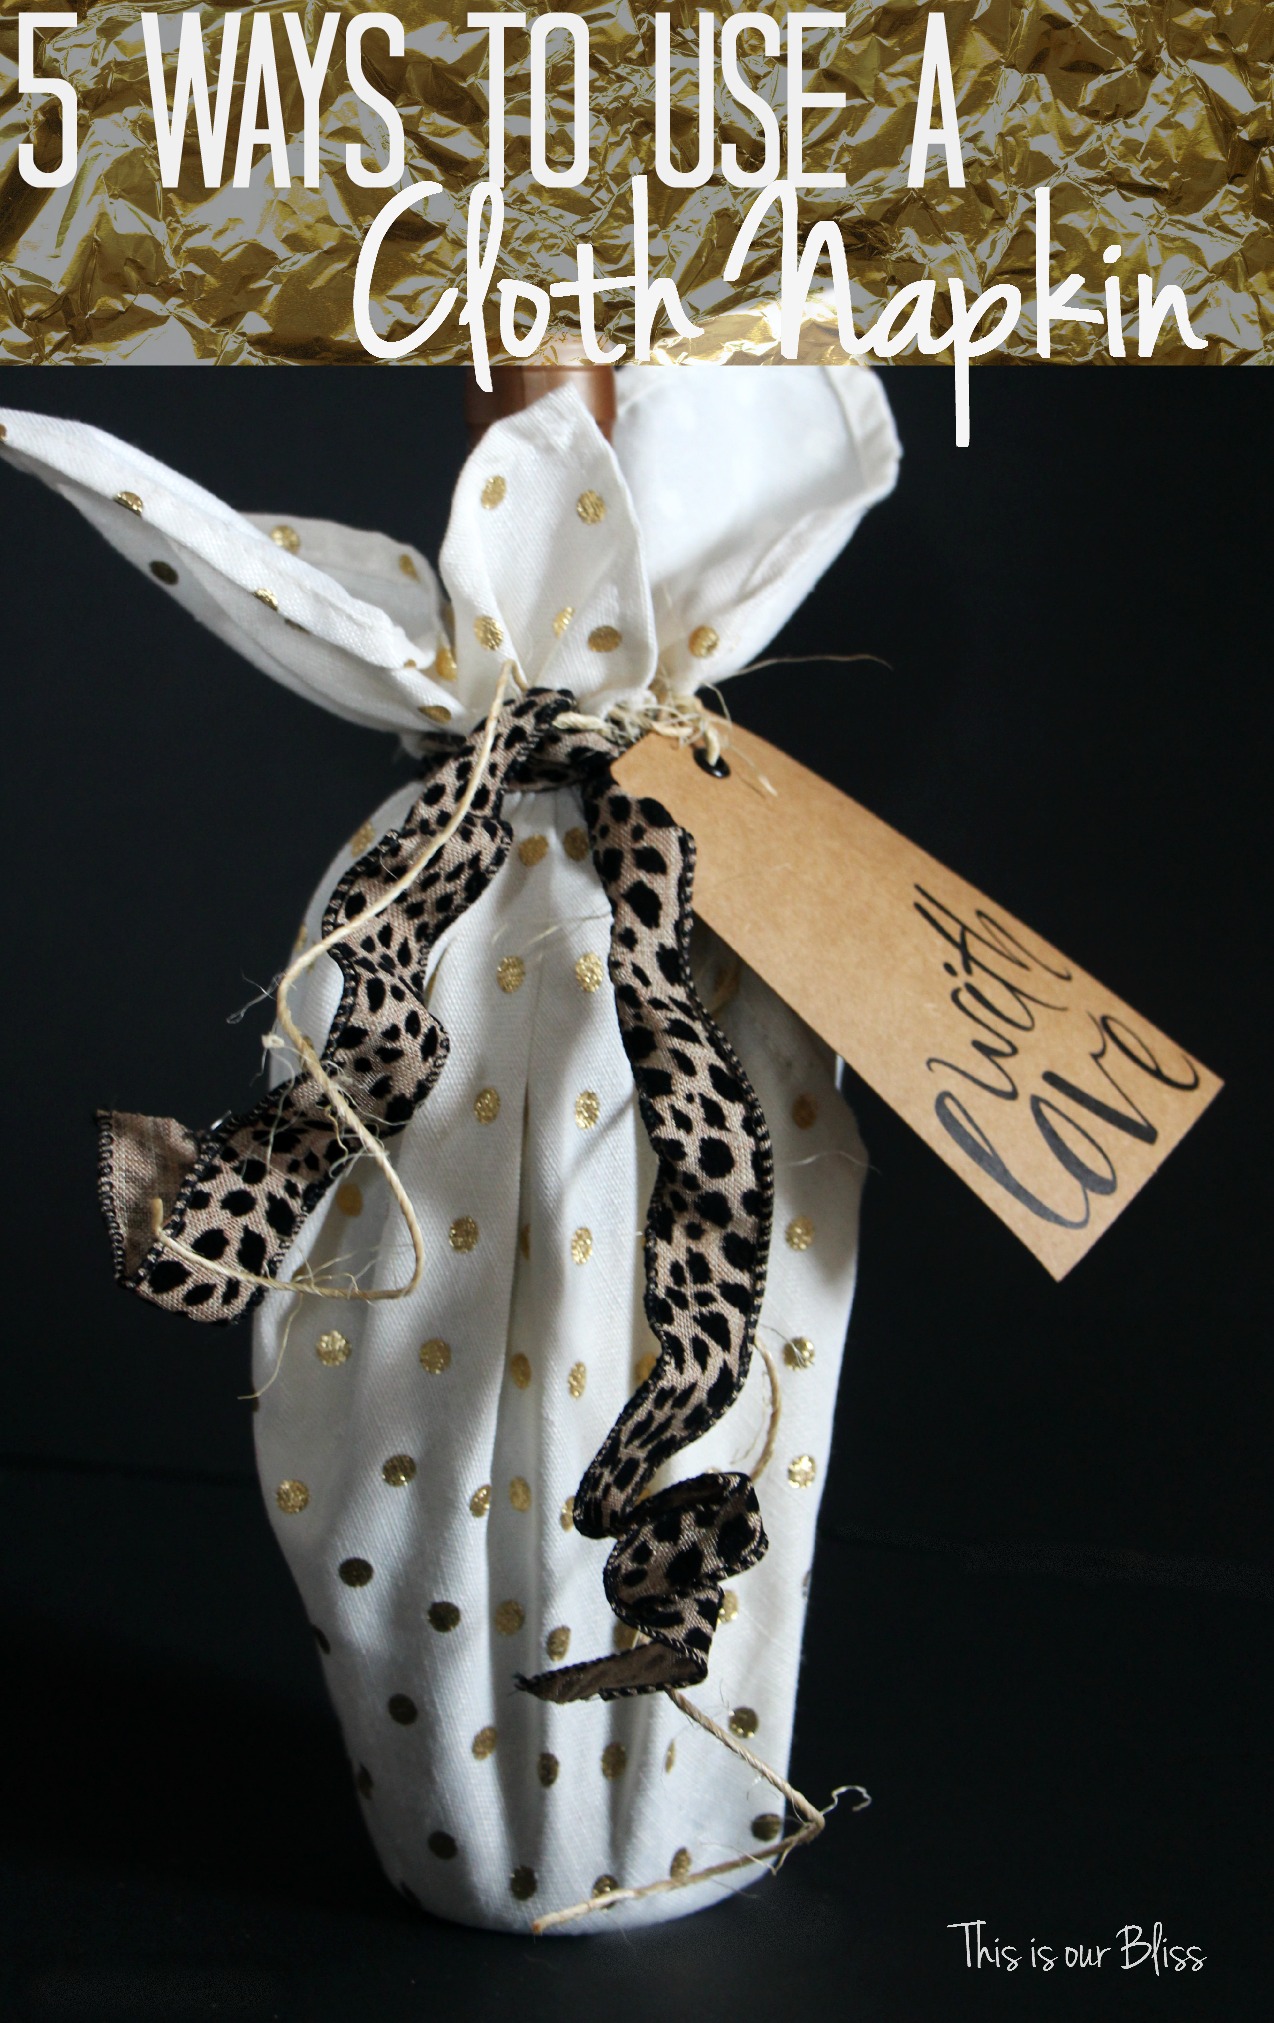 https://thisisourbliss.com/wp-content/uploads/2015/10/cloth-napkin-as-gift-wrap-how-to-use-cloth-napkins-5-ways-to-use-cloth-napkins-gold-foil-napkins-leopard-gold-this-is-our-bliss1.jpg